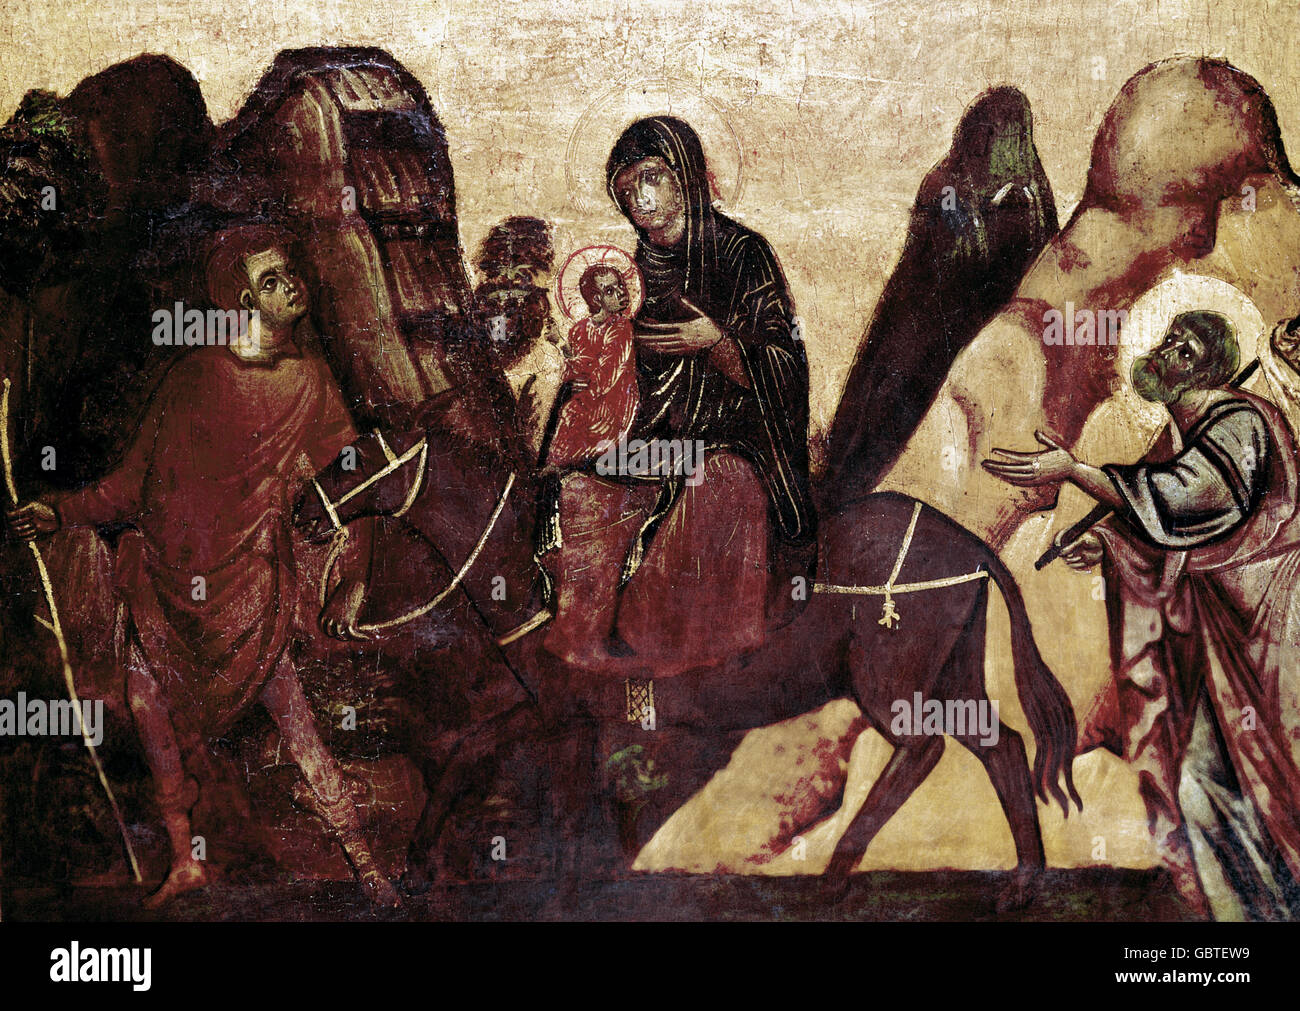 fine arts, religious art, Holy Family, 'Escape to Egypt', painting by Guido da Siena, 2nd half of the 13th century, State Lindenau Museum, Altenburg, Stock Photo